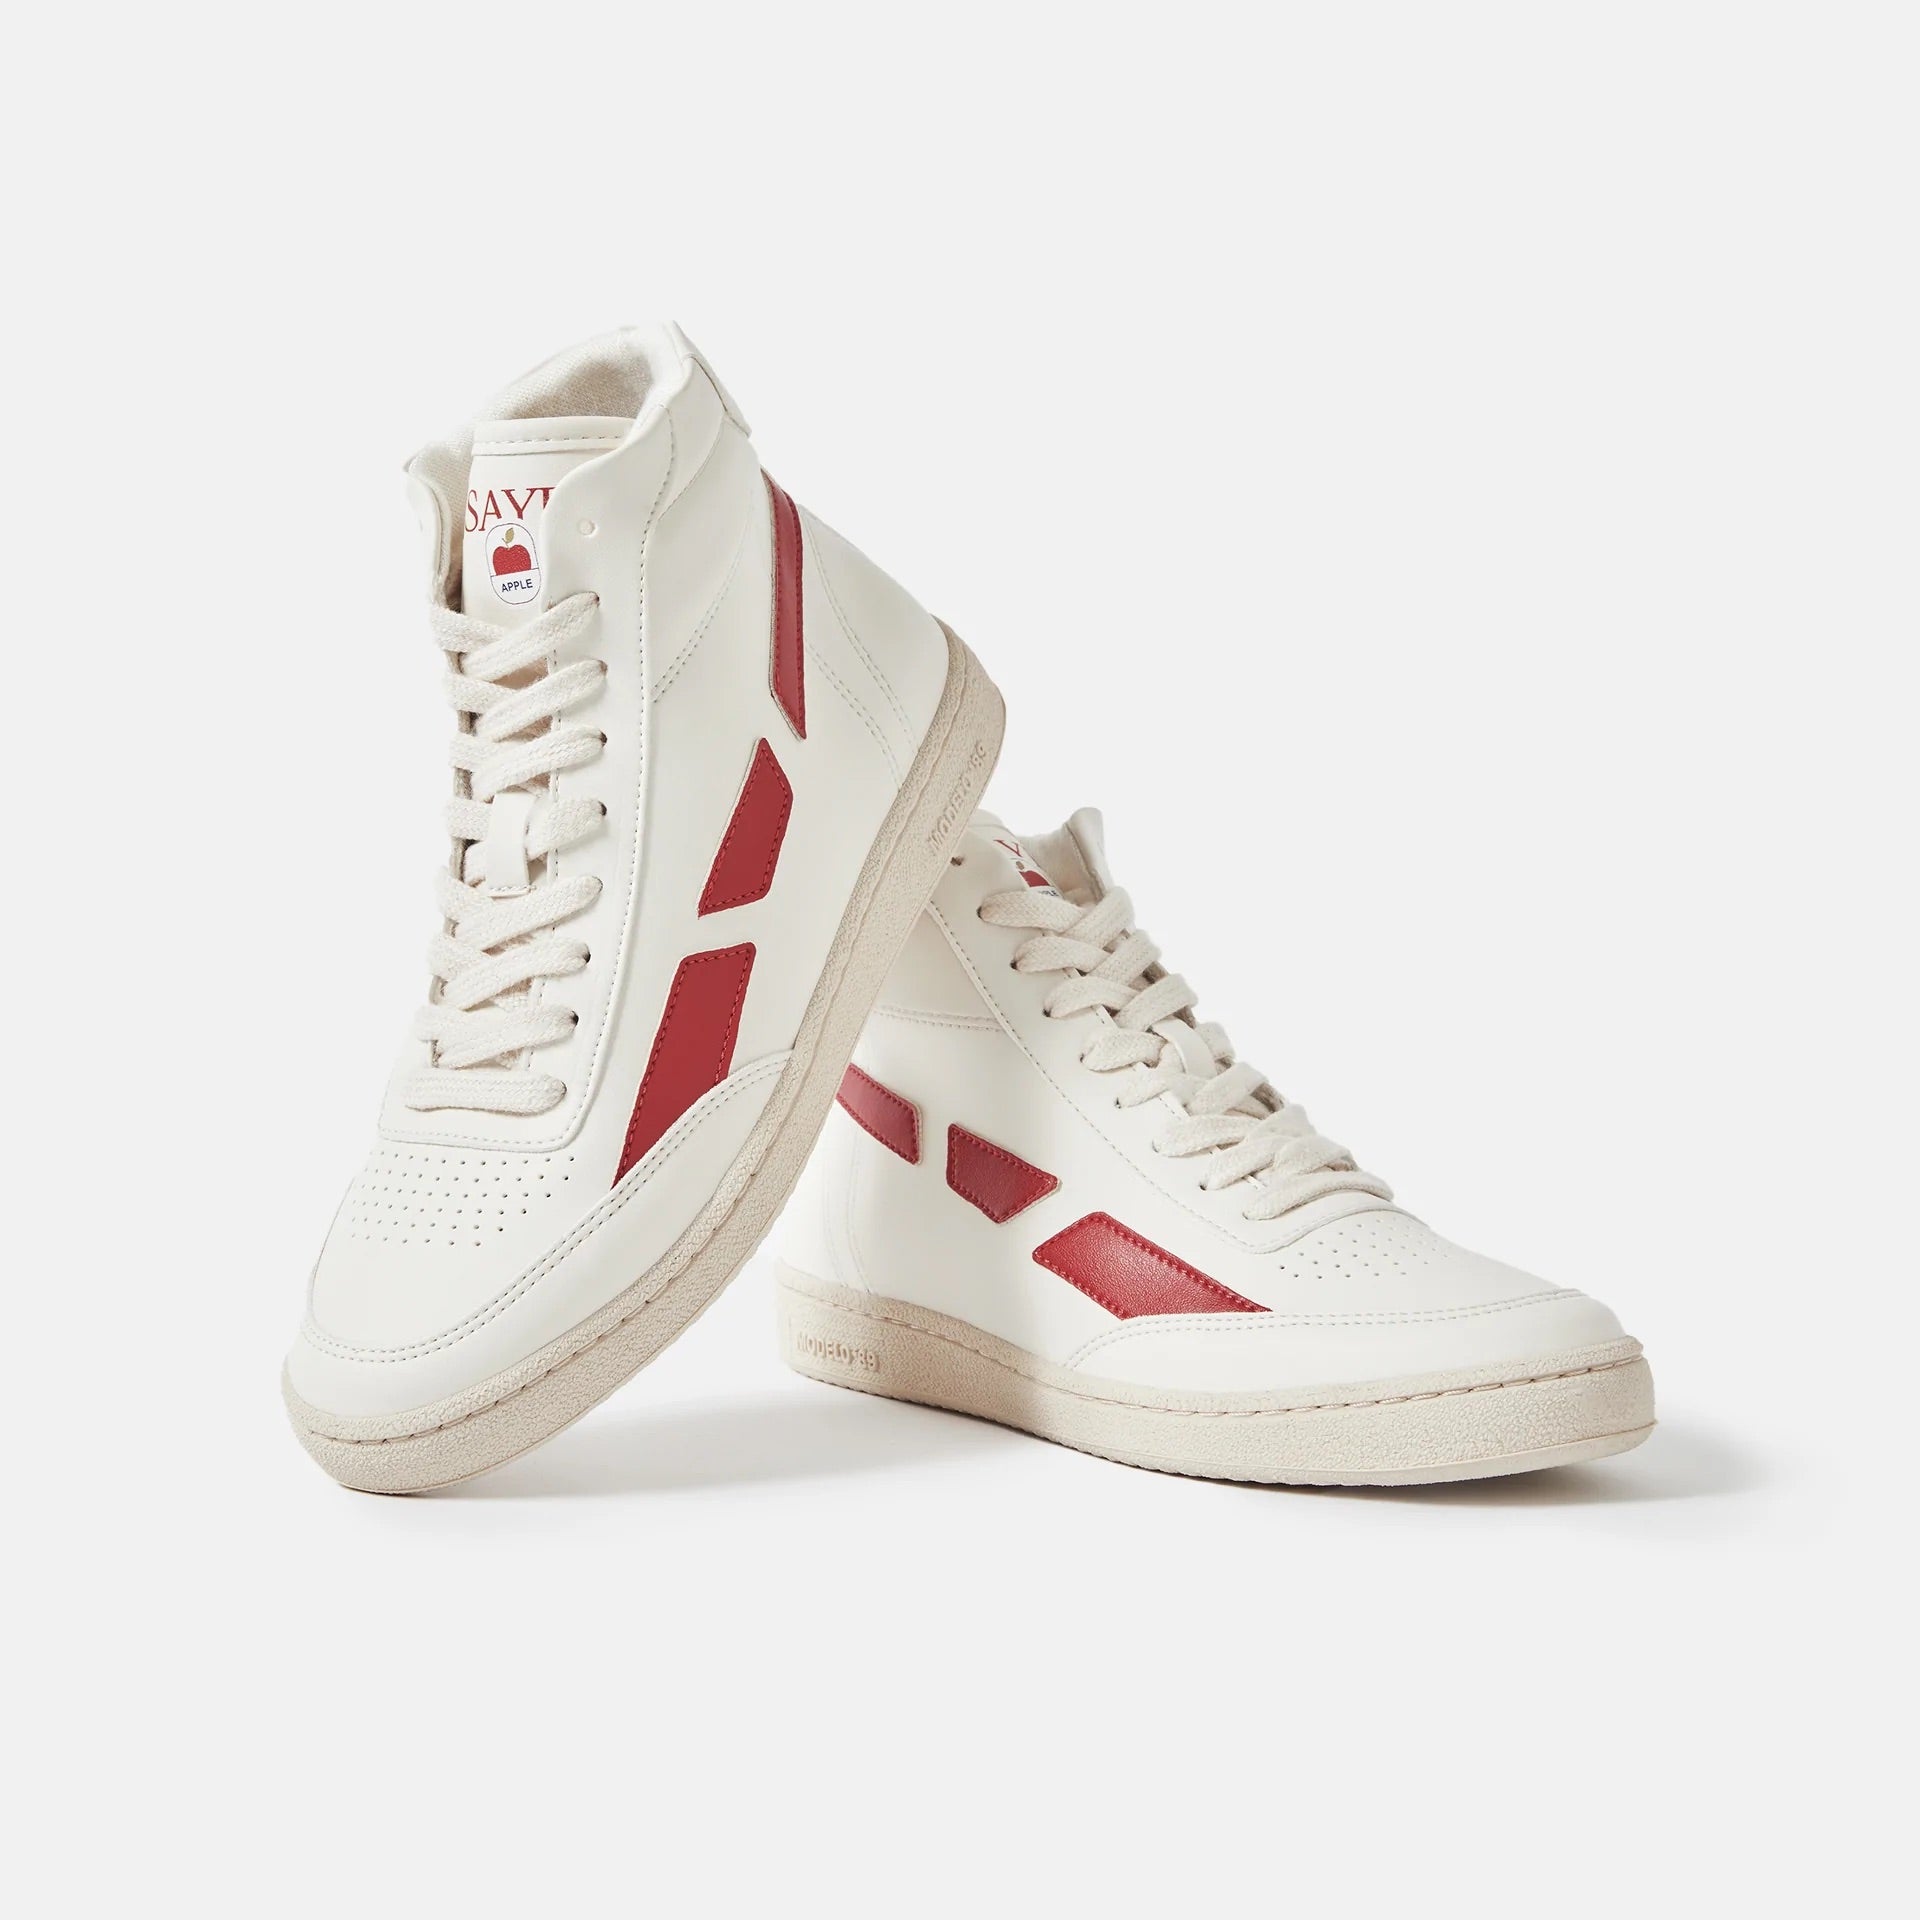 A pair of SAYE Modelo '89 Hi Sneakers - Apple with bamboo lining on a white surface.